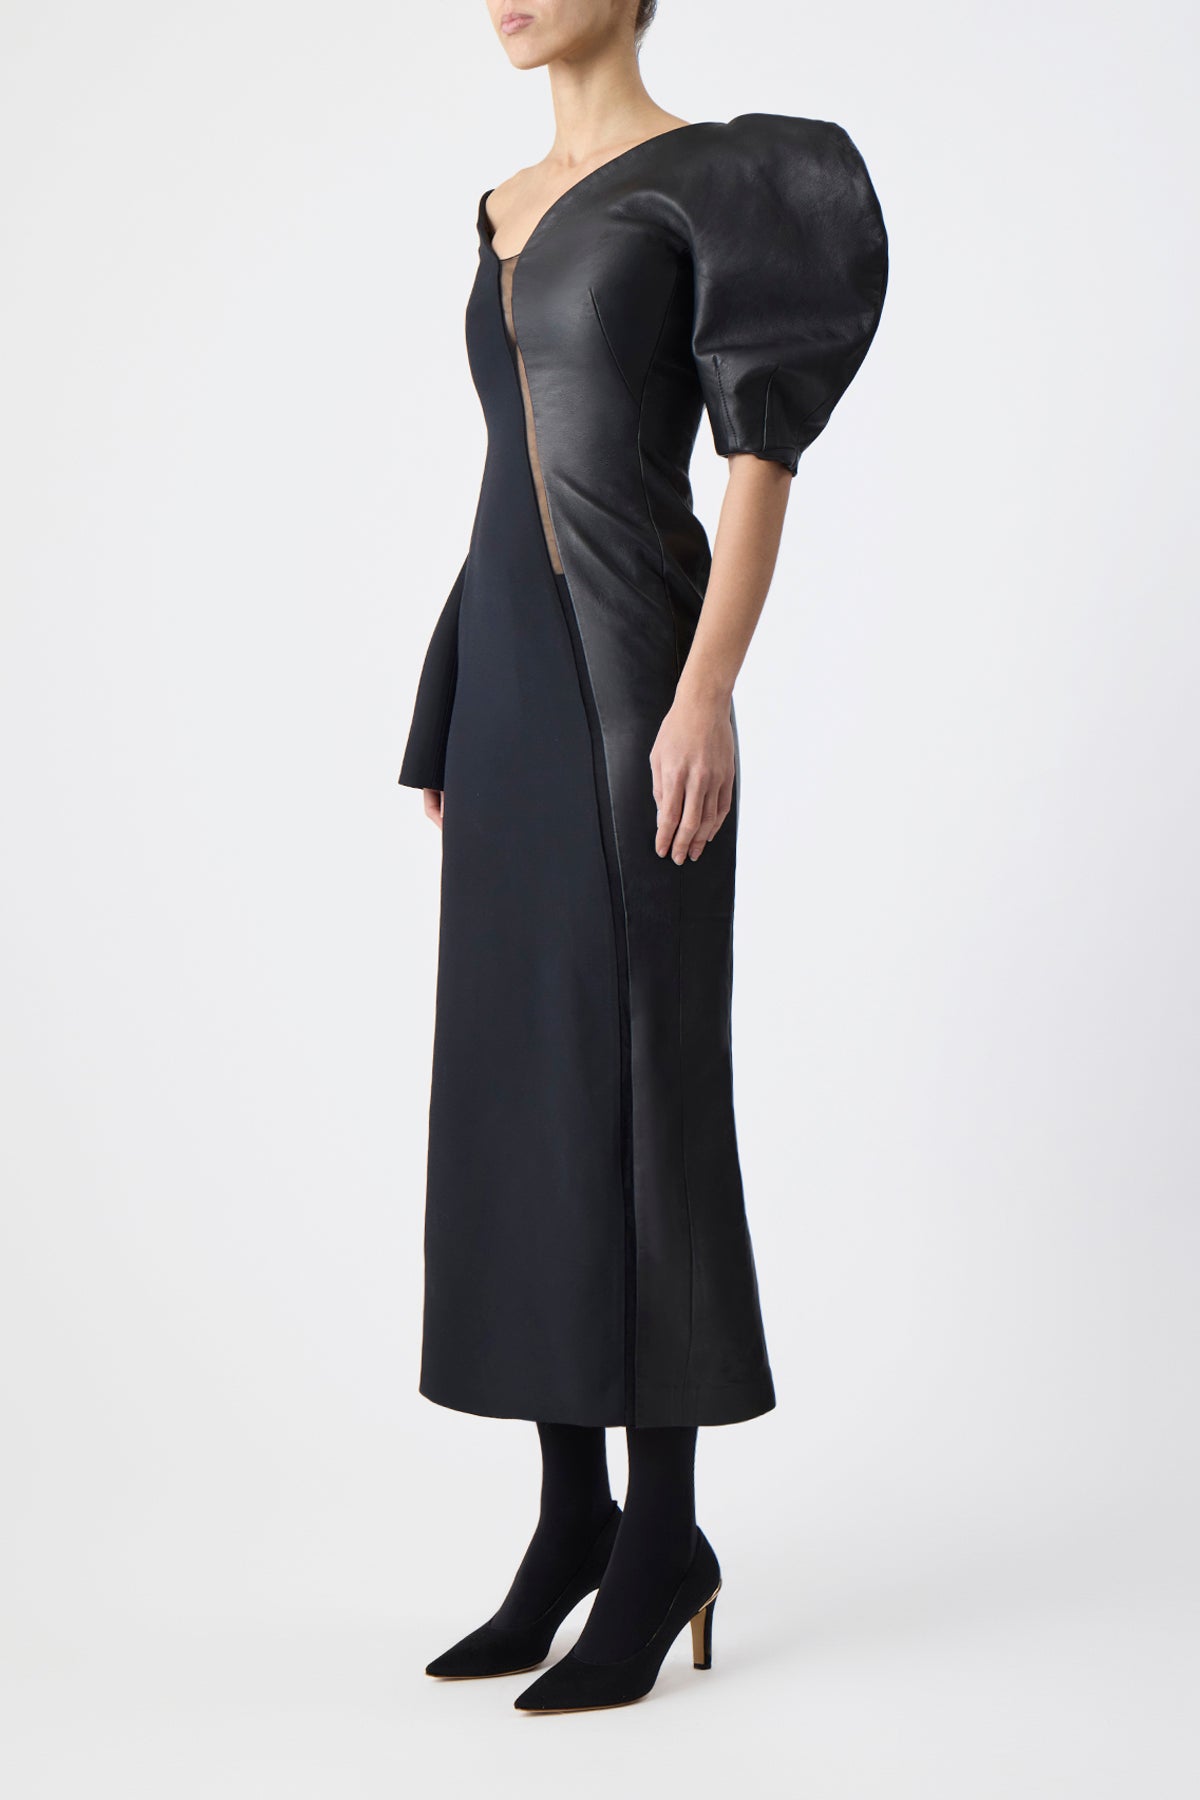 Merlin Dress in Black Silk Wool Cady and Nappa Leather